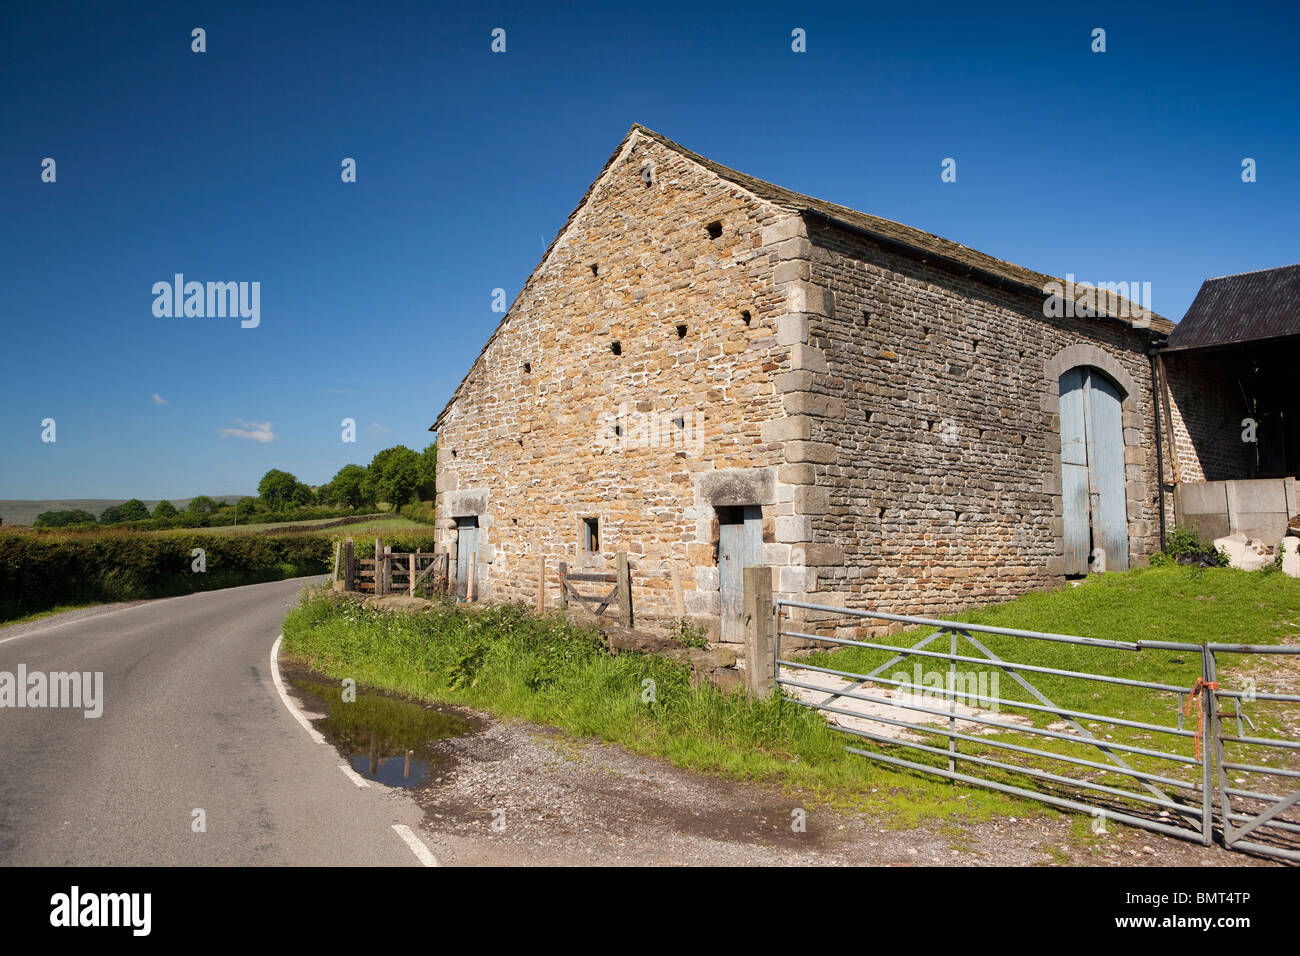 UK, England, Derbyshire, Vale of Edale, Nether Booth, stone built barn Stock Photo